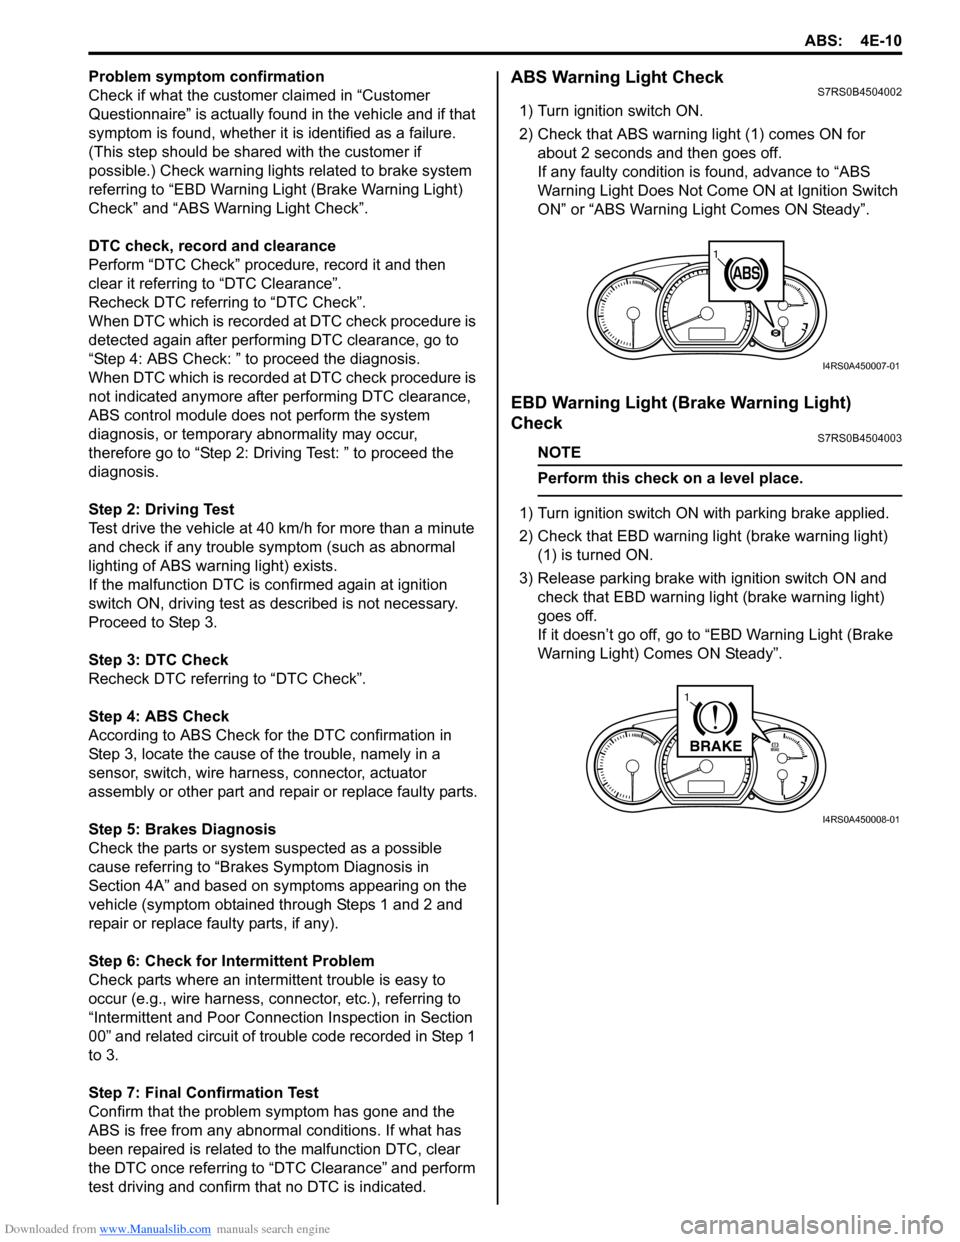 SUZUKI SWIFT 2006 2.G Service Workshop Manual Downloaded from www.Manualslib.com manuals search engine ABS: 4E-10
Problem symptom confirmation
Check if what the customer claimed in “Customer 
Questionnaire” is actually found in the vehicle an